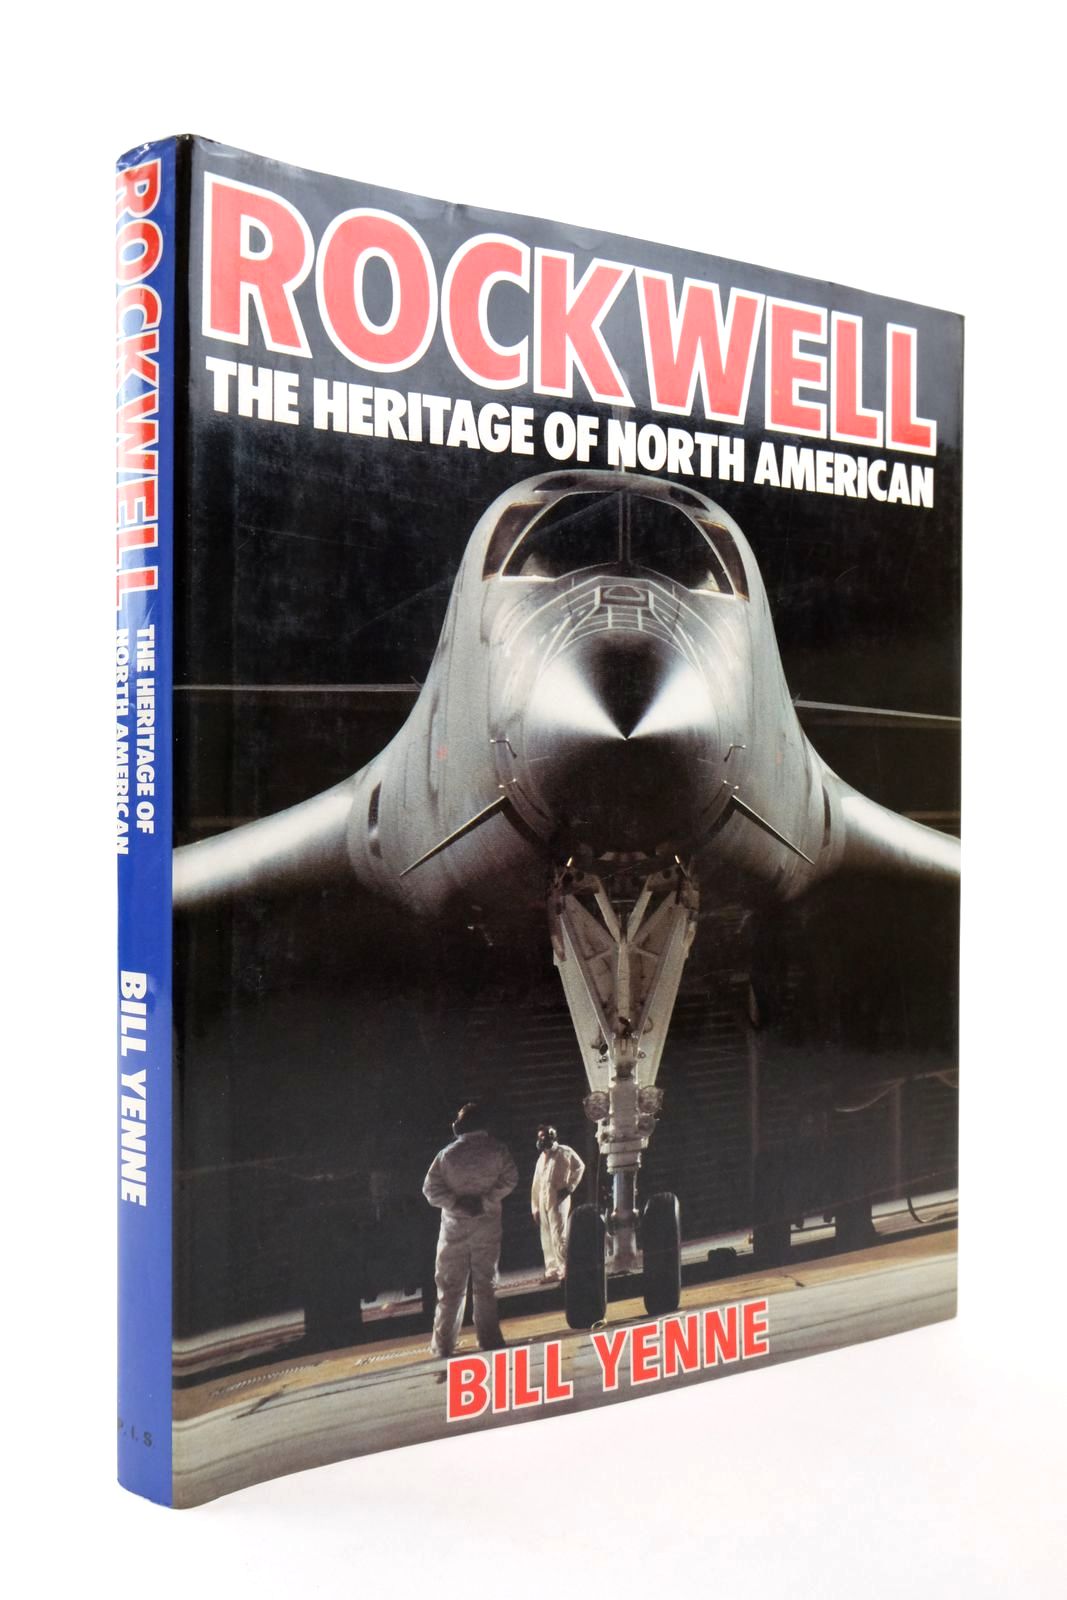 Photo of ROCKWELL THE HERITAGE OF NORTH AMERICA written by Yenne, Bill published by Bison Books (STOCK CODE: 2138459)  for sale by Stella & Rose's Books